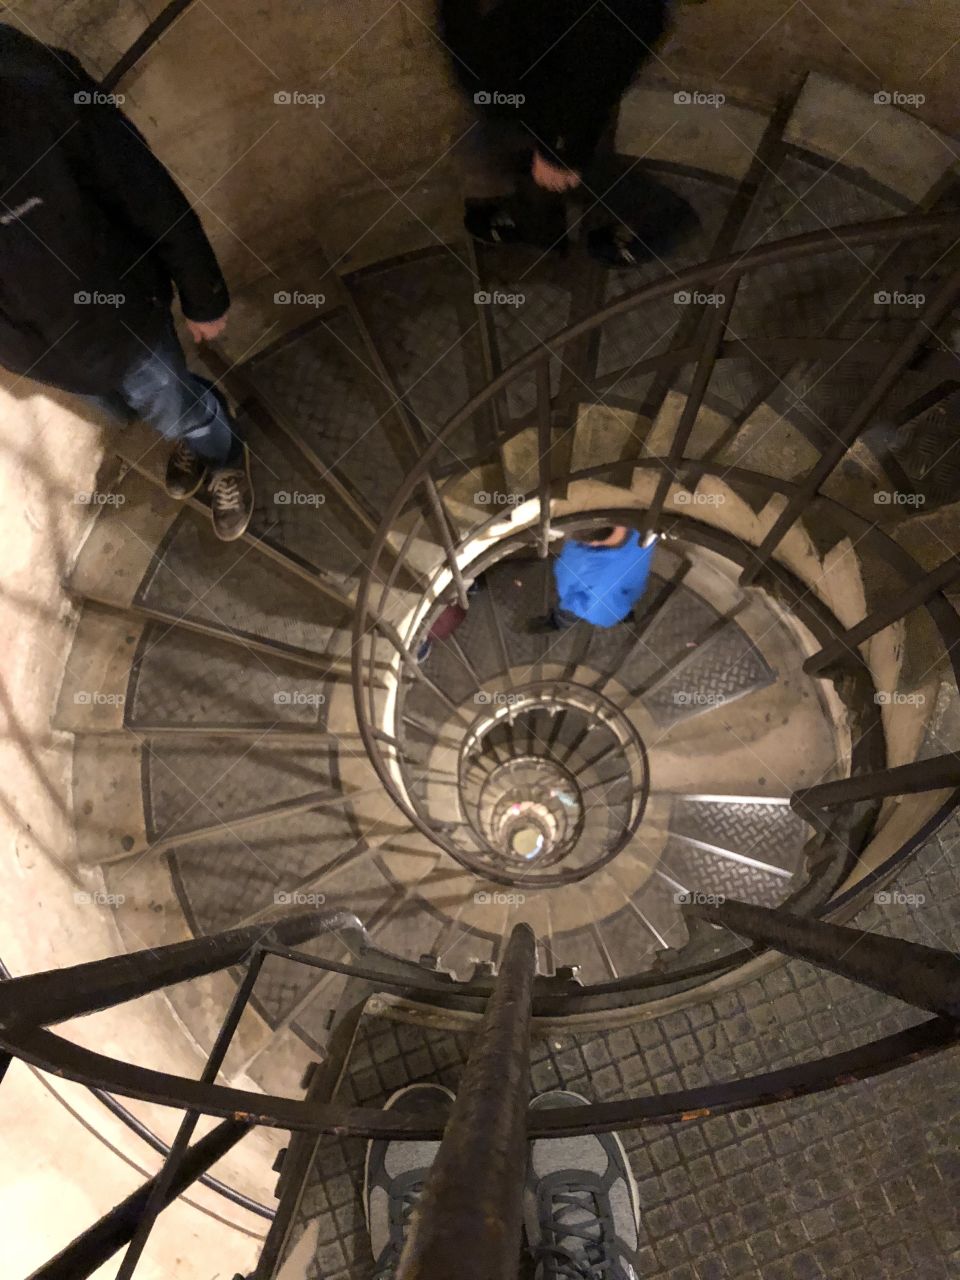 A long, winding staircase taken from the top of the Arc de Triumph in Paris, France. 